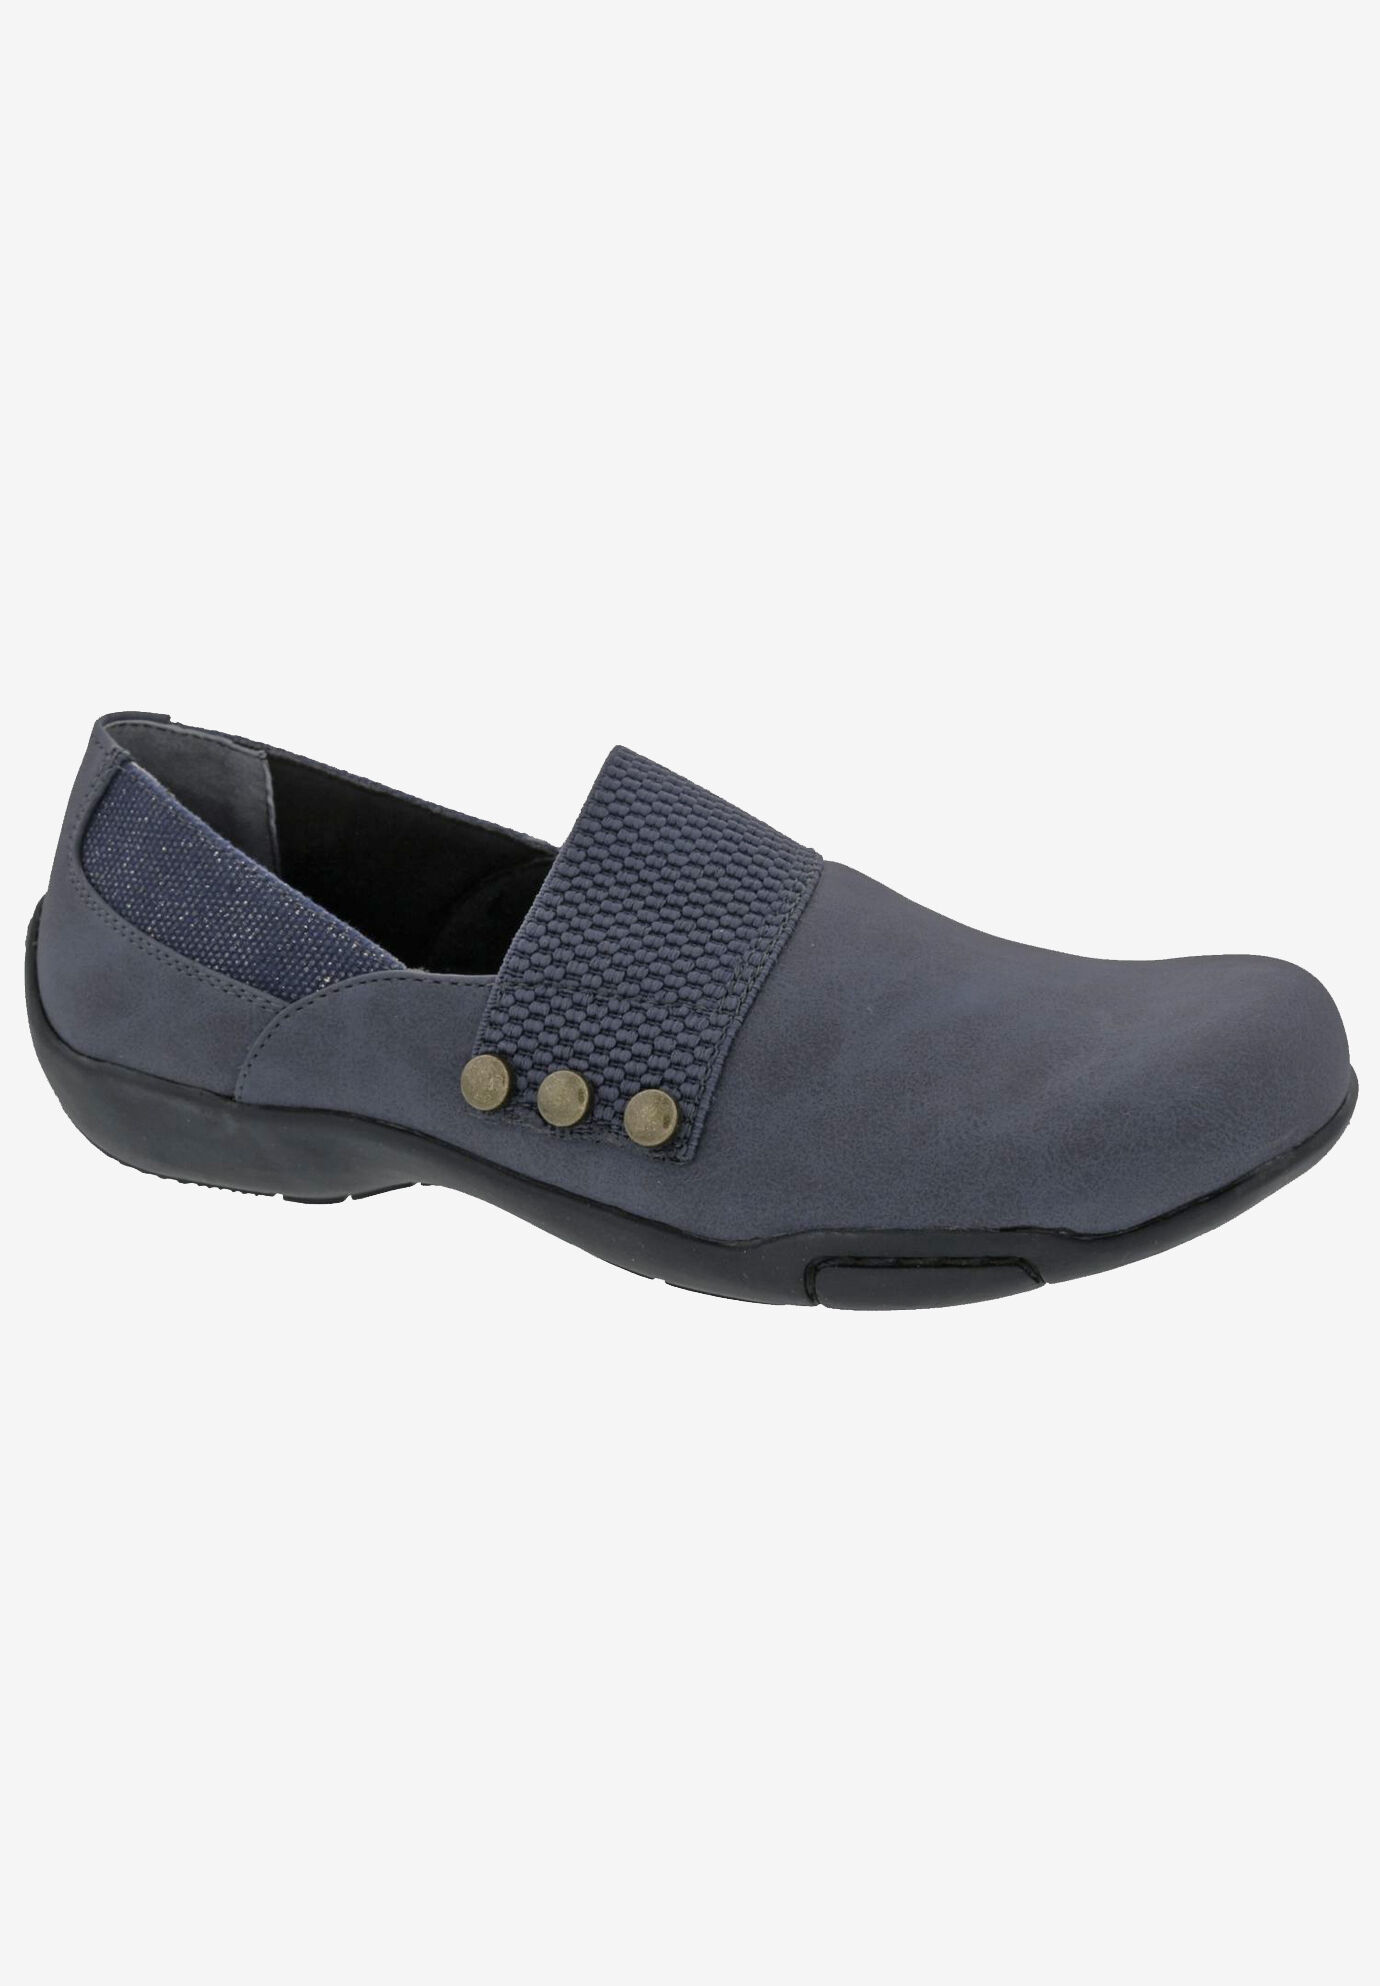 Wide Width Women's Cake Flat by Ros Hommerson in Navy (Size 8 W)